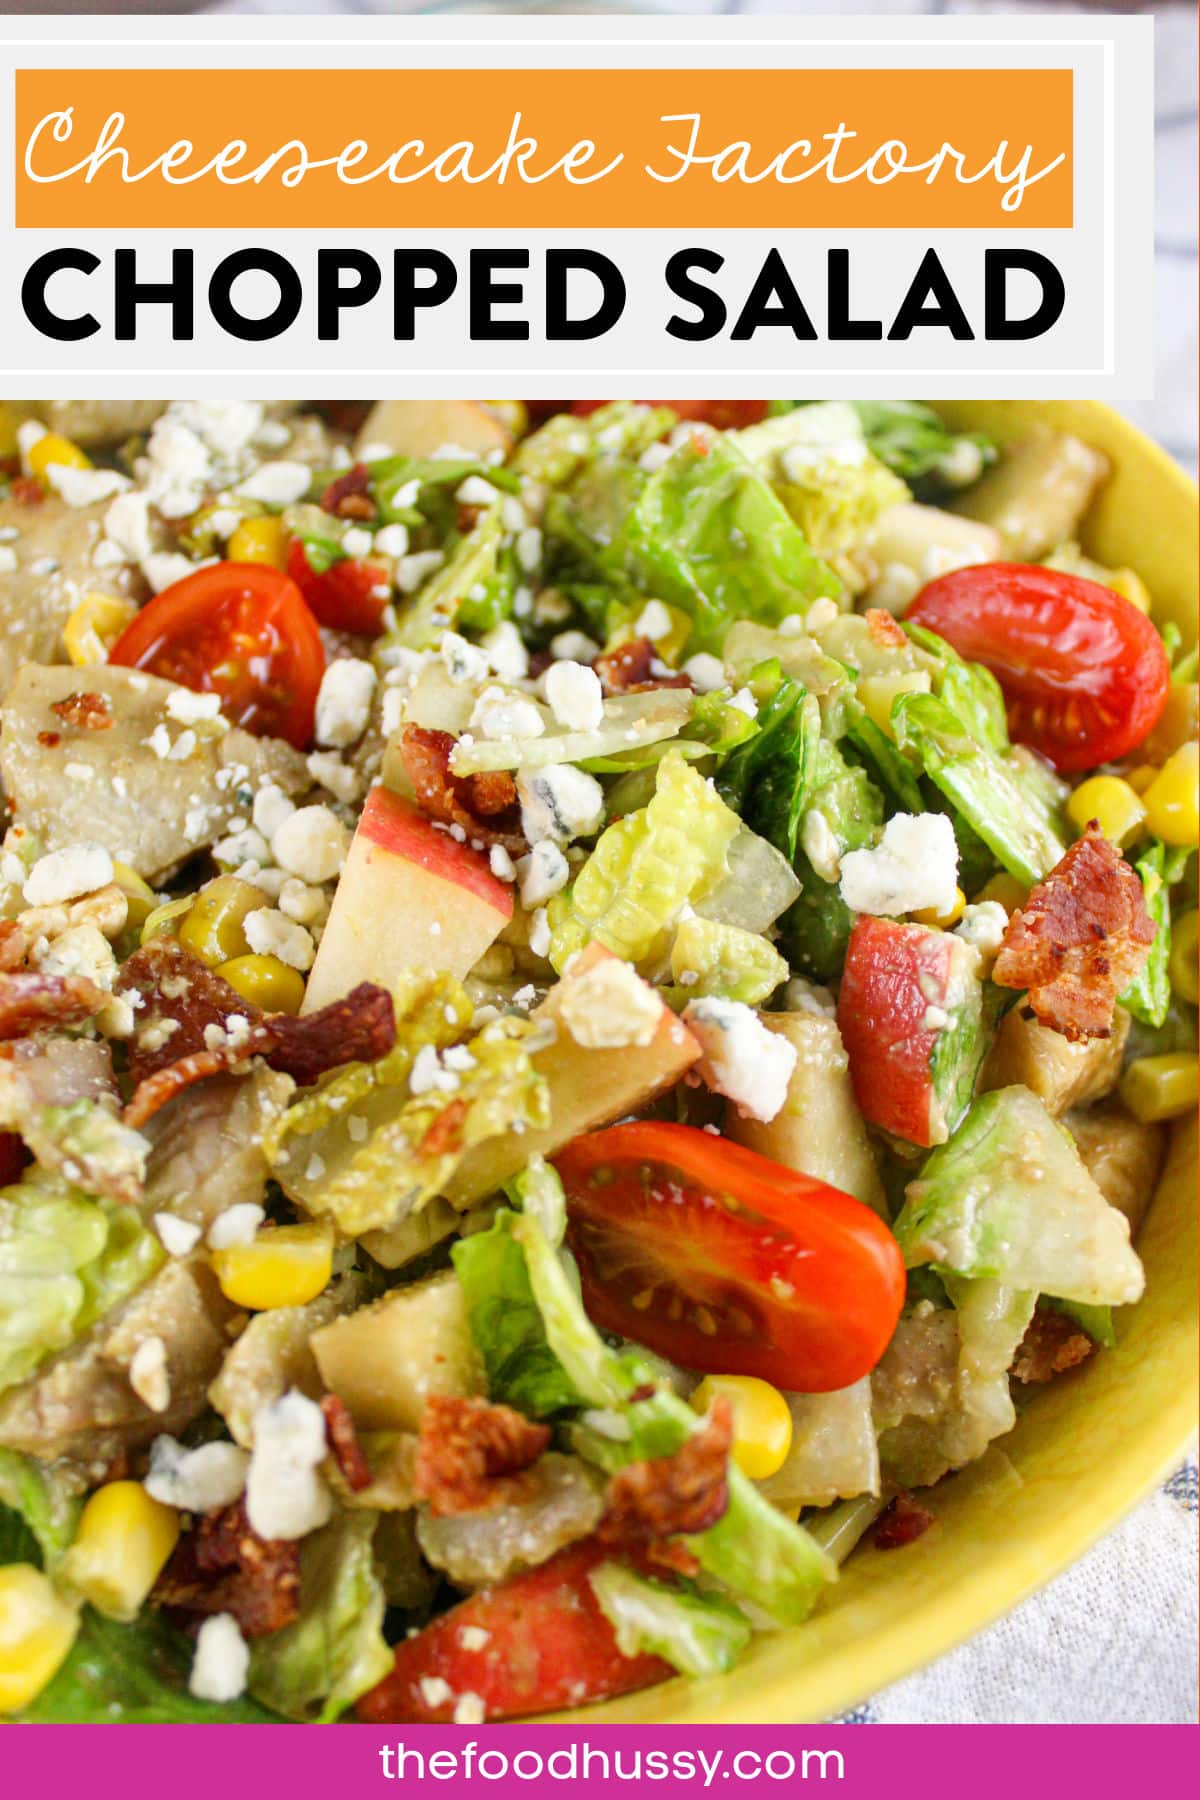 Cheesecake Factory Chopped Salad is a delicious blend of romaine, juicy grilled chicken, grape tomatoes, diced avocado, sweet corn, smoky bacon, chunks of blue cheese and diced apple all tossed in a light Balsamic Vinaigrette! This salad has something for everyone - with a little crunch, a little sweet, a little meat - it's my favorite! via @foodhussy